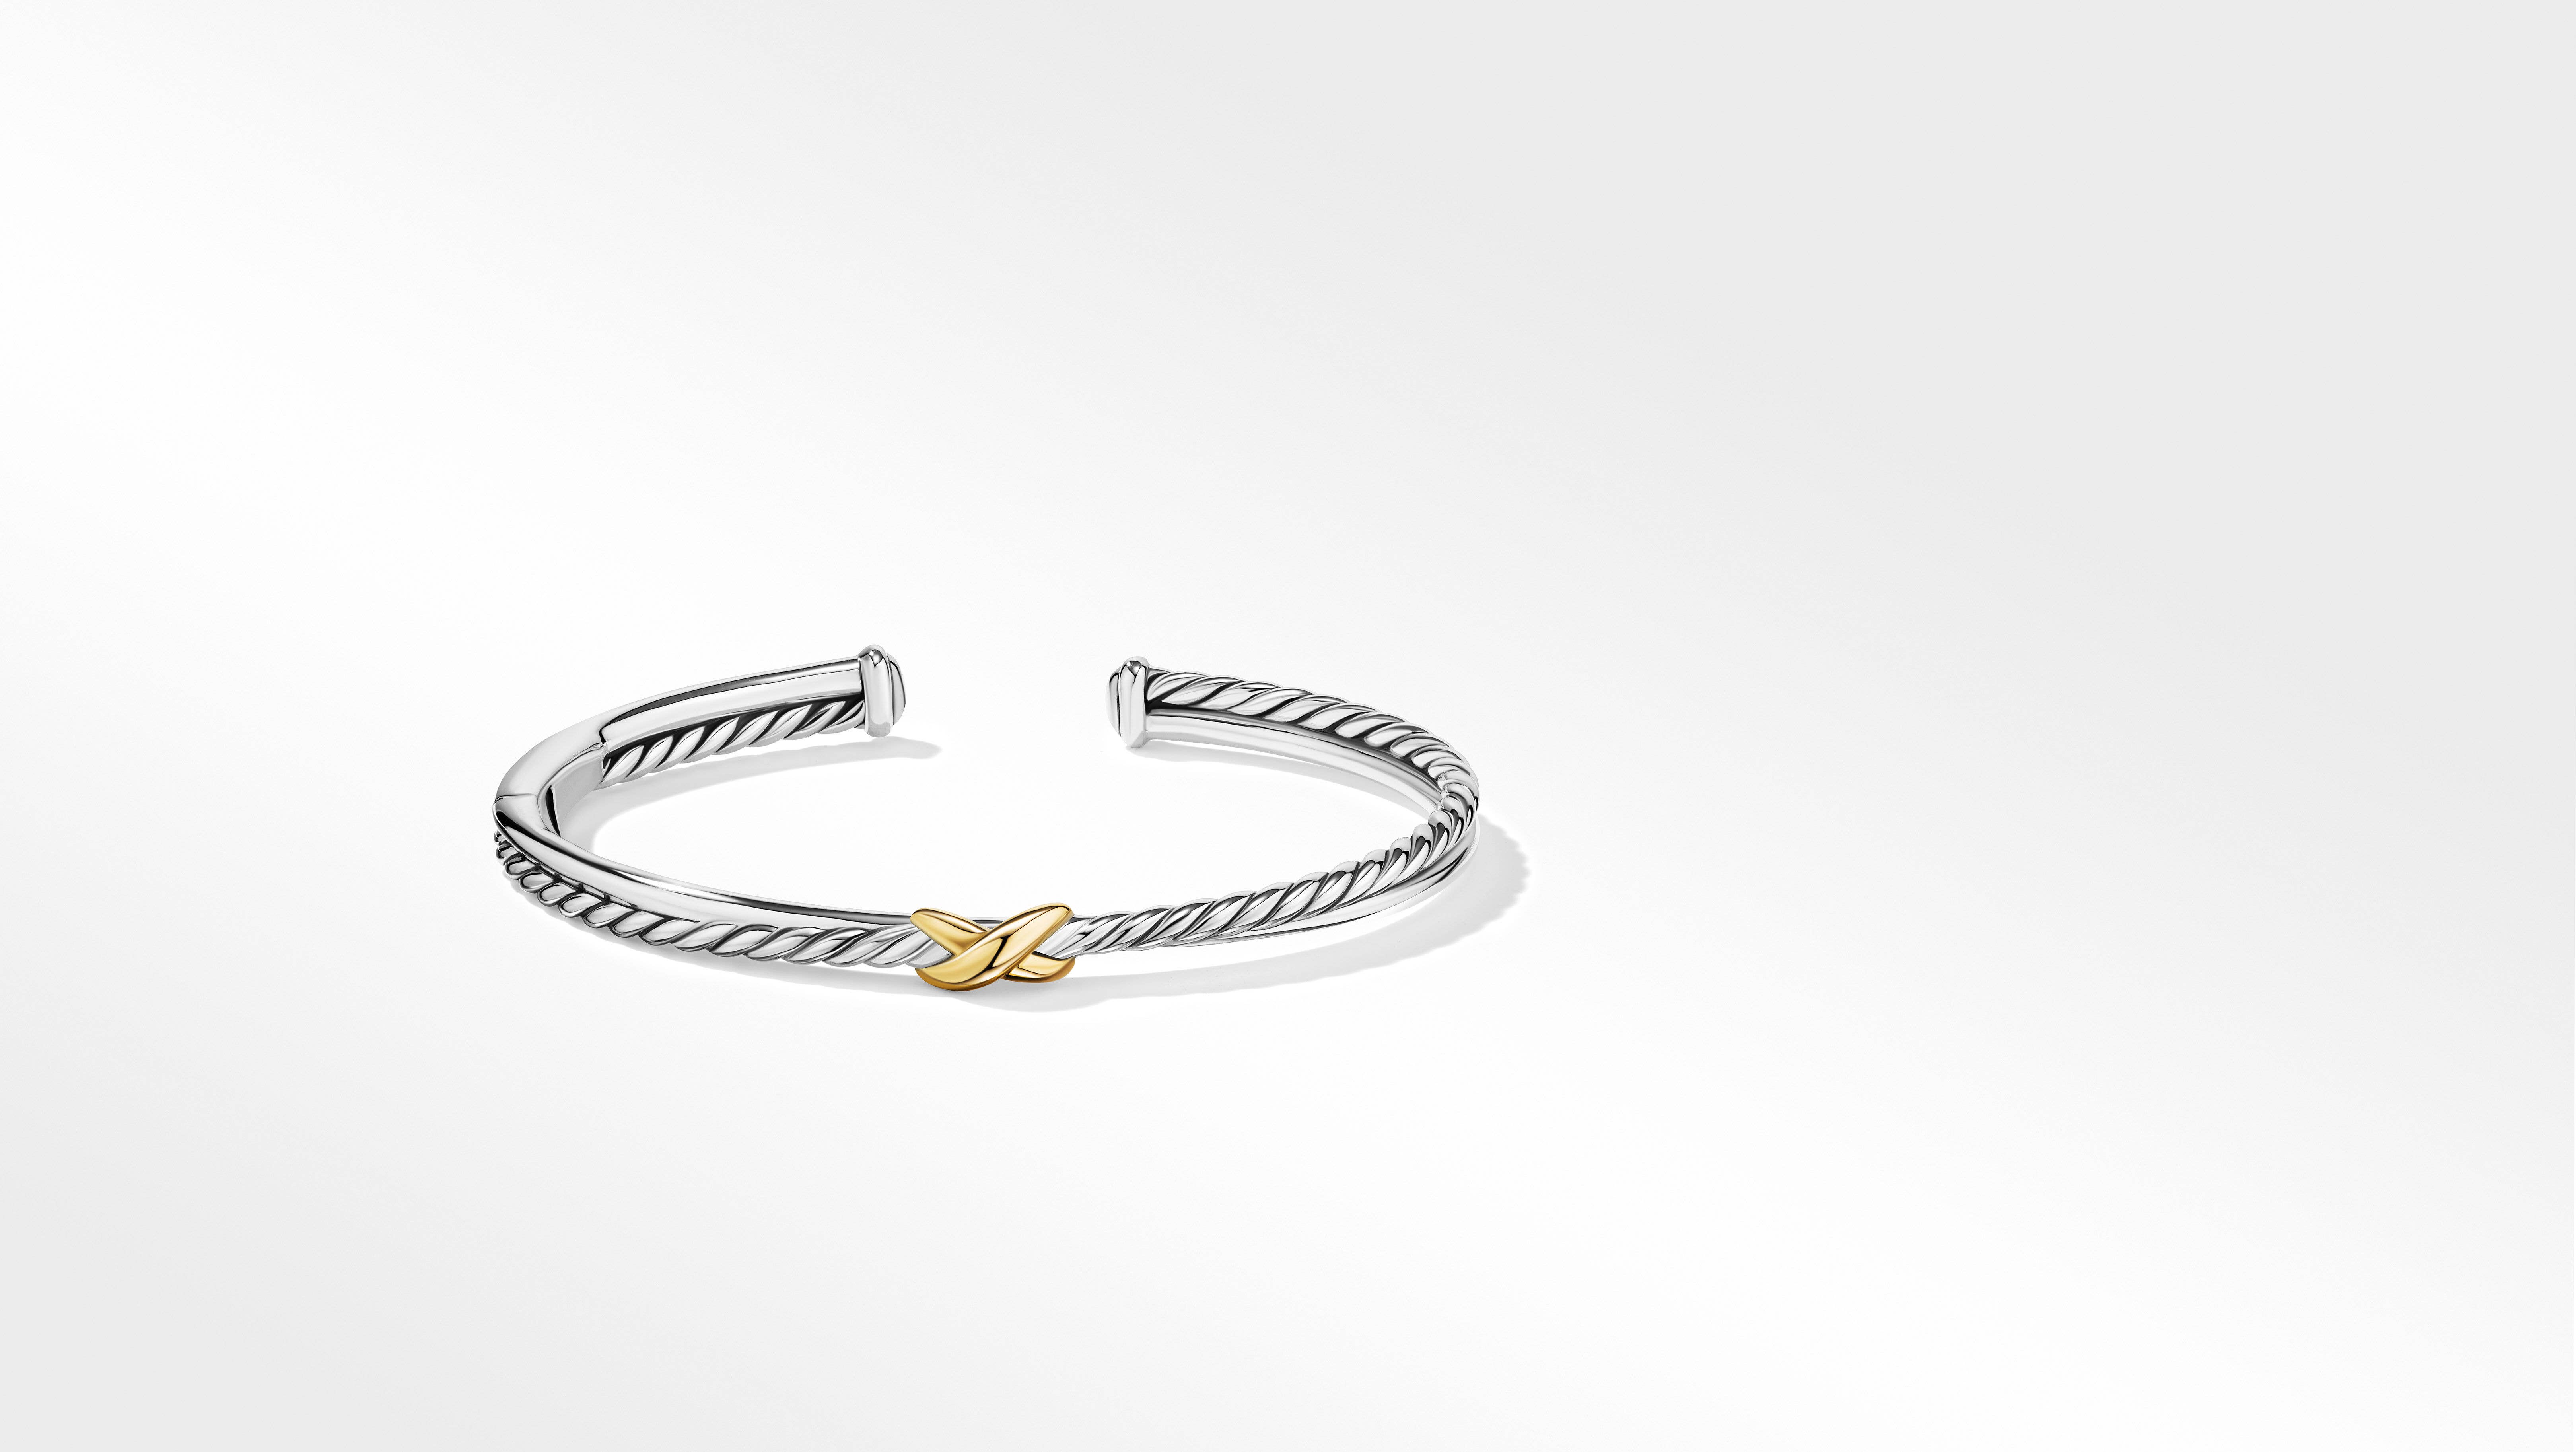 Petite X Center Station Bracelet in Sterling Silver with 18K Yellow Gold